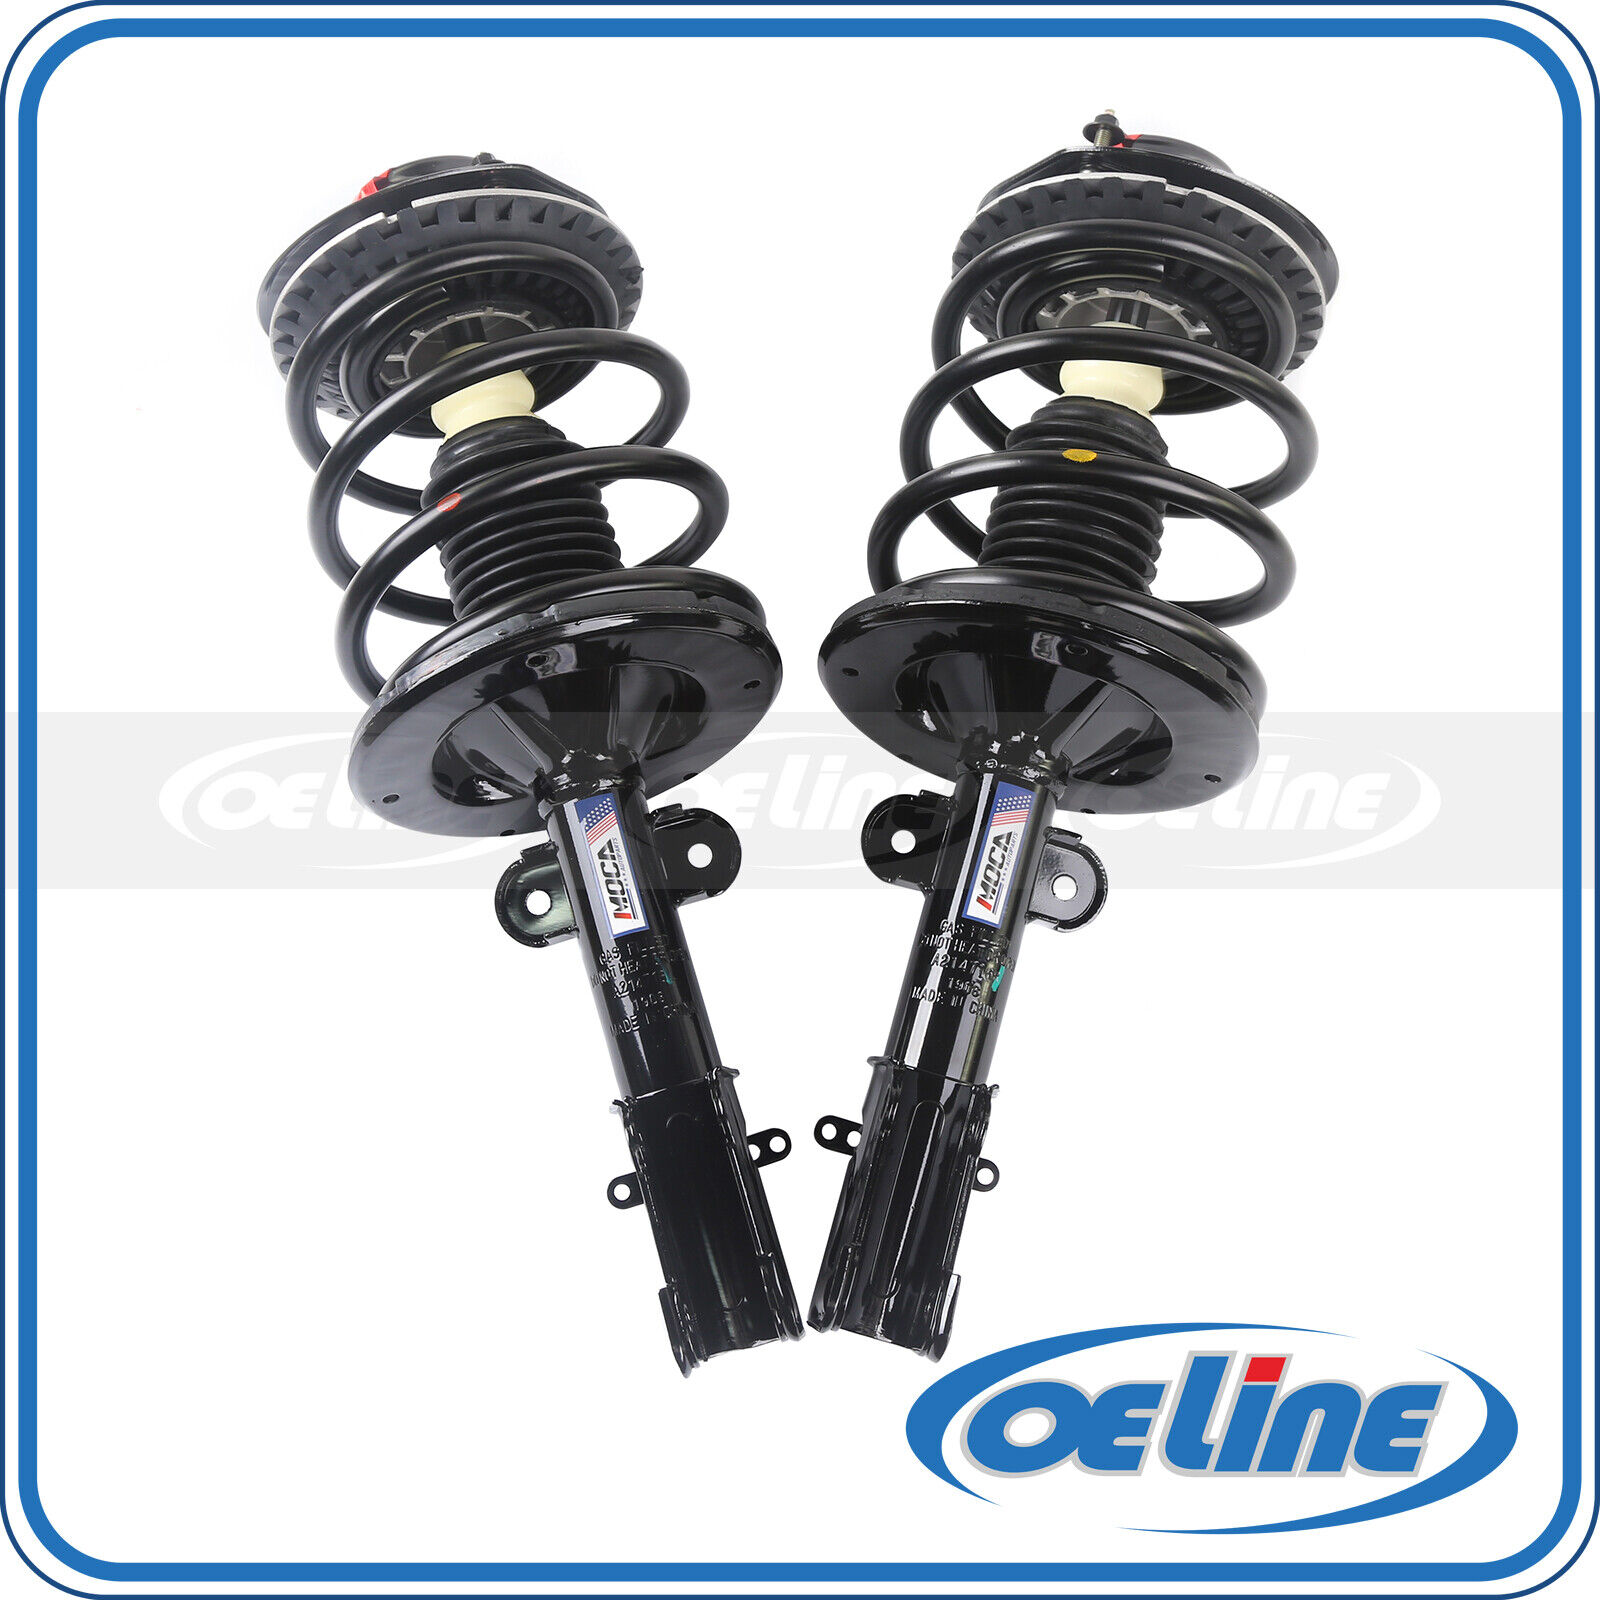 2 Front pair Shocks Struts Assembly for 01-07 Dodge Grand Caravan Town & Country